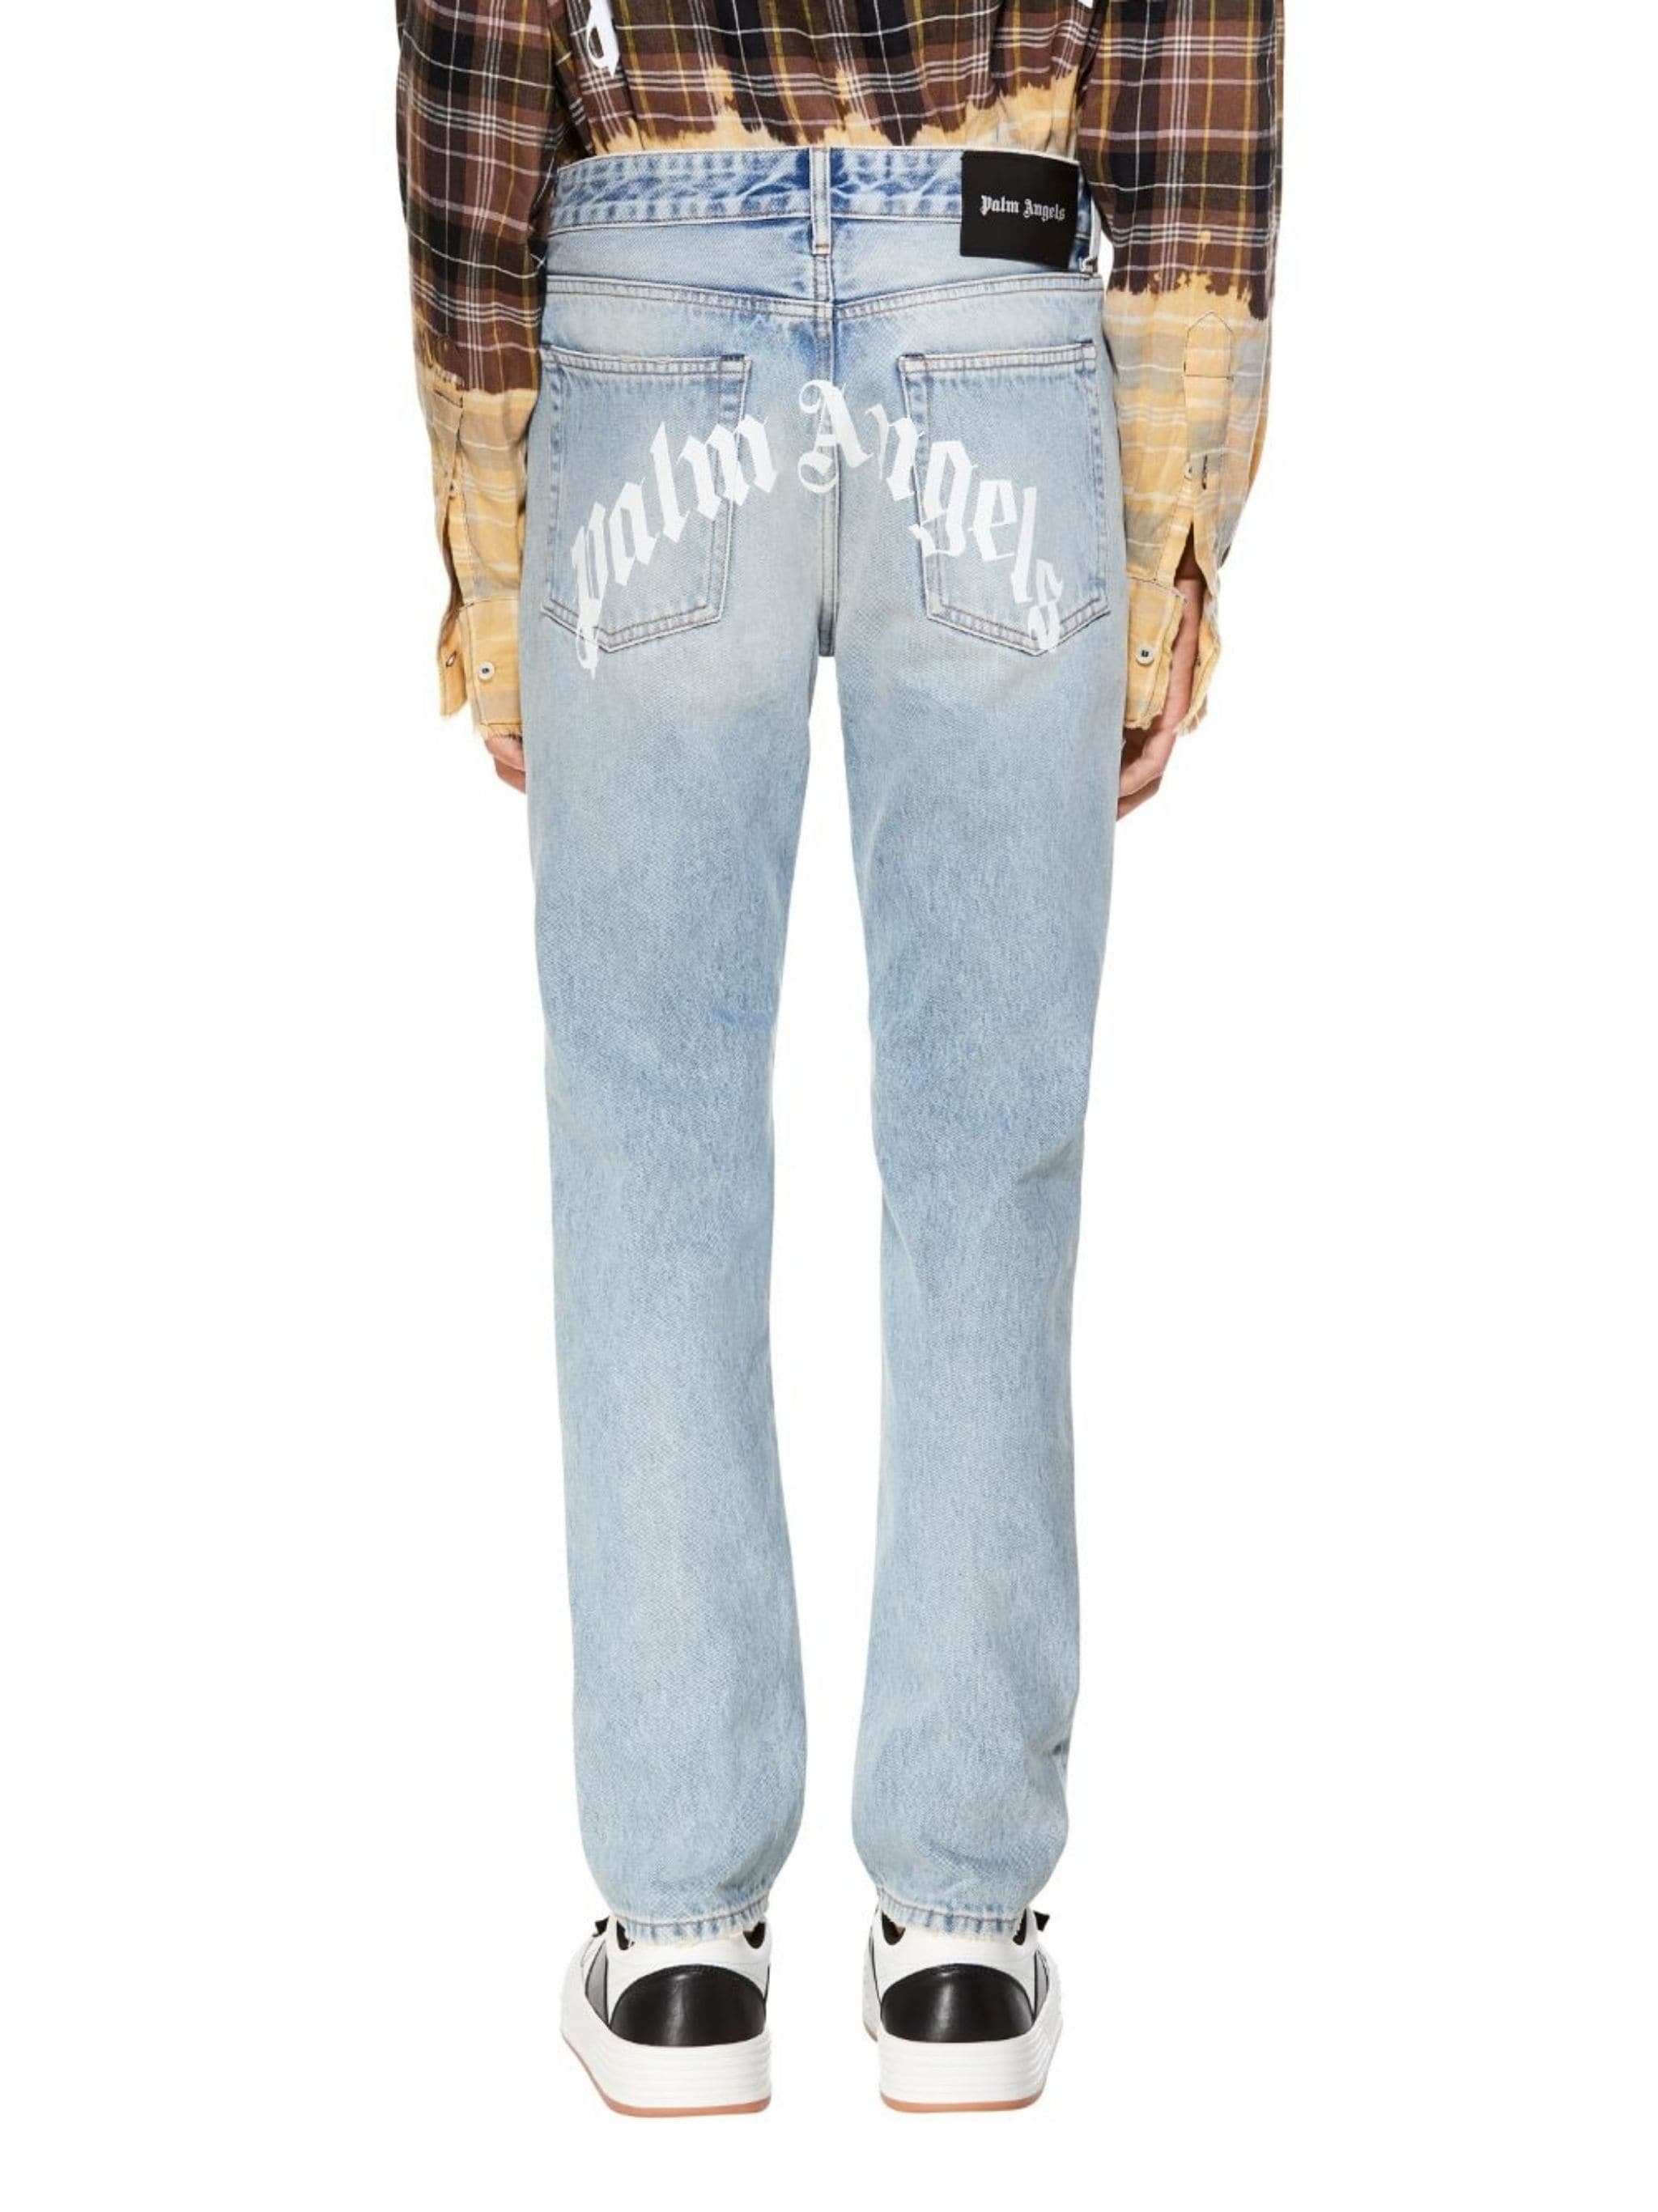 curved-logo print jeans - 6